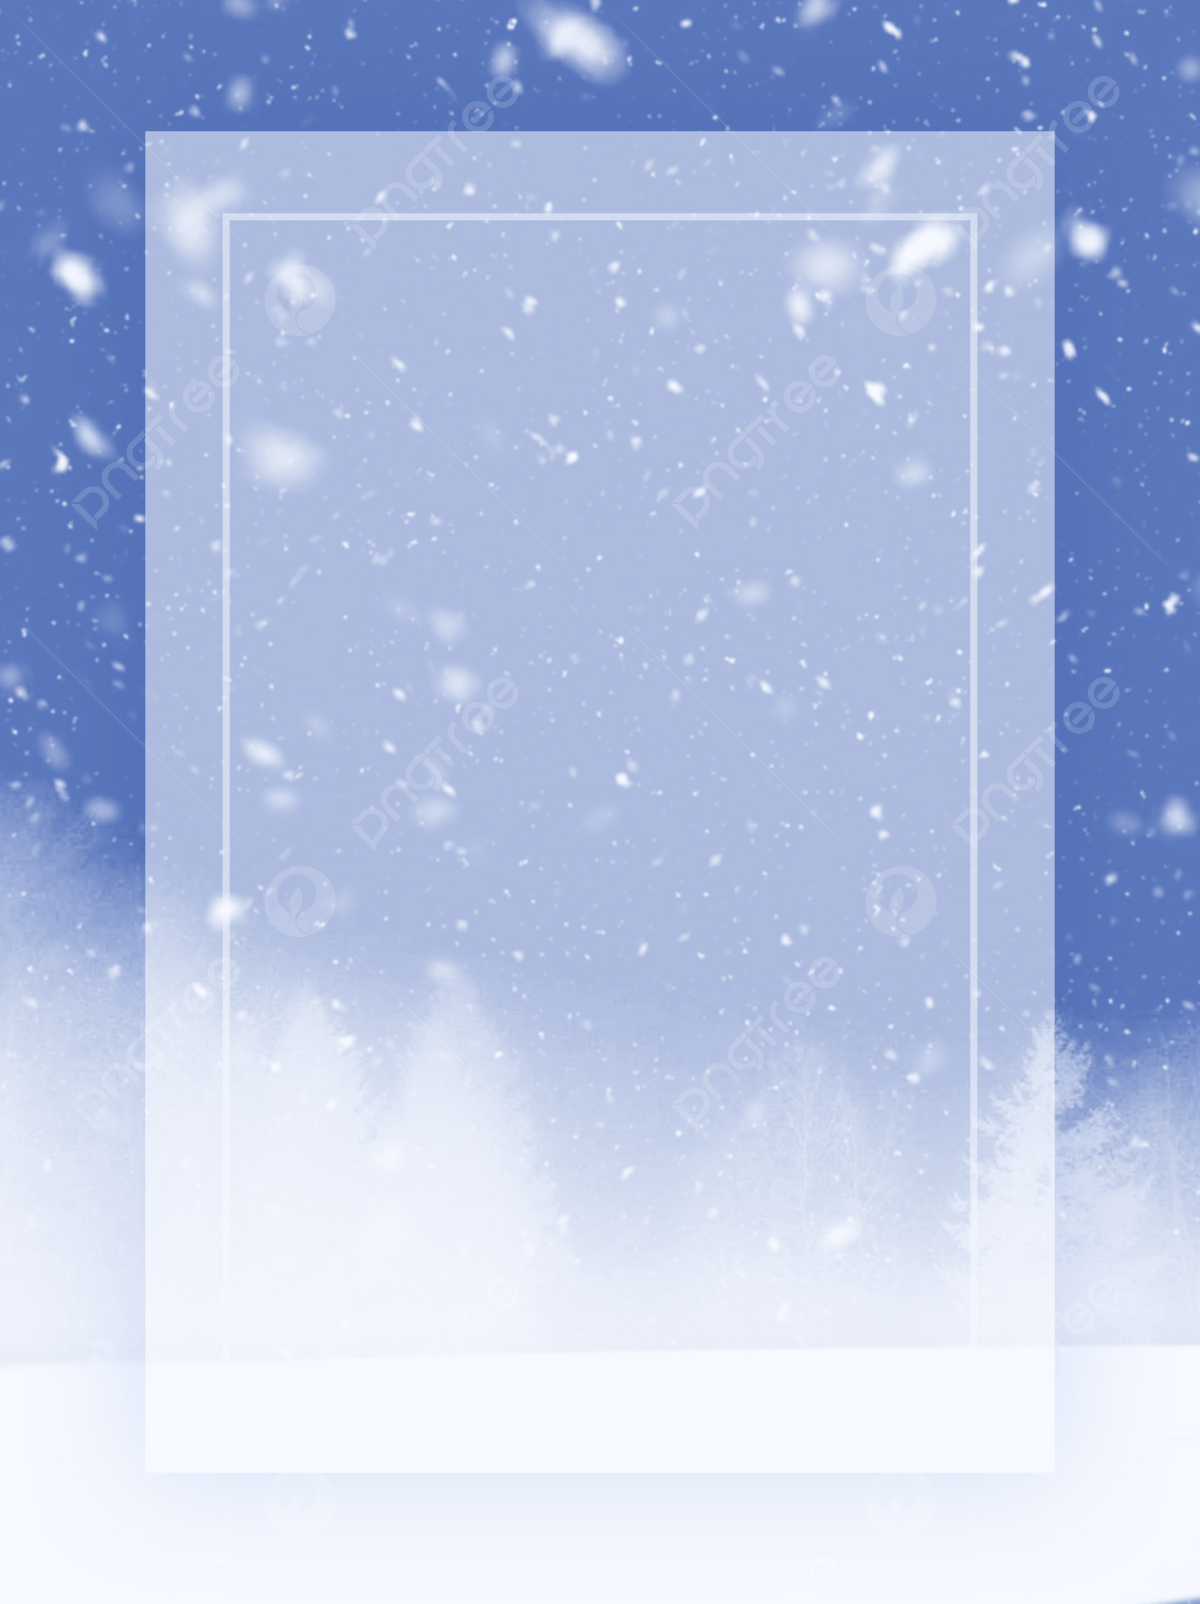 Full Aesthetic Snowflake Background Wallpaper Image For Free Download